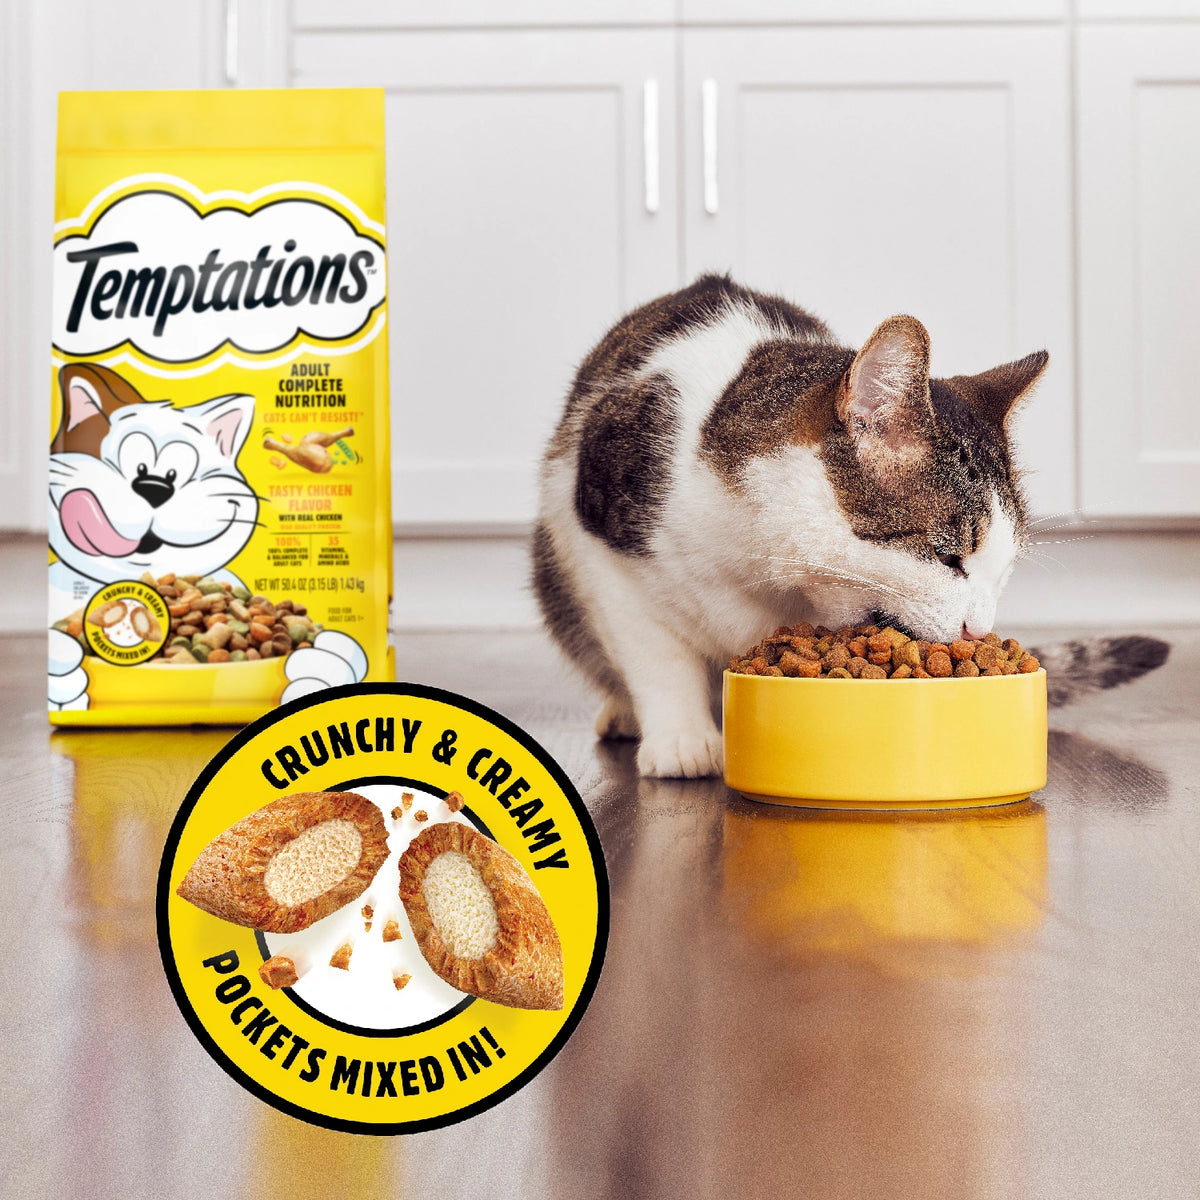 Cat eating TMEPTATIONS crunchy & creamy main meal with pockets mixed in